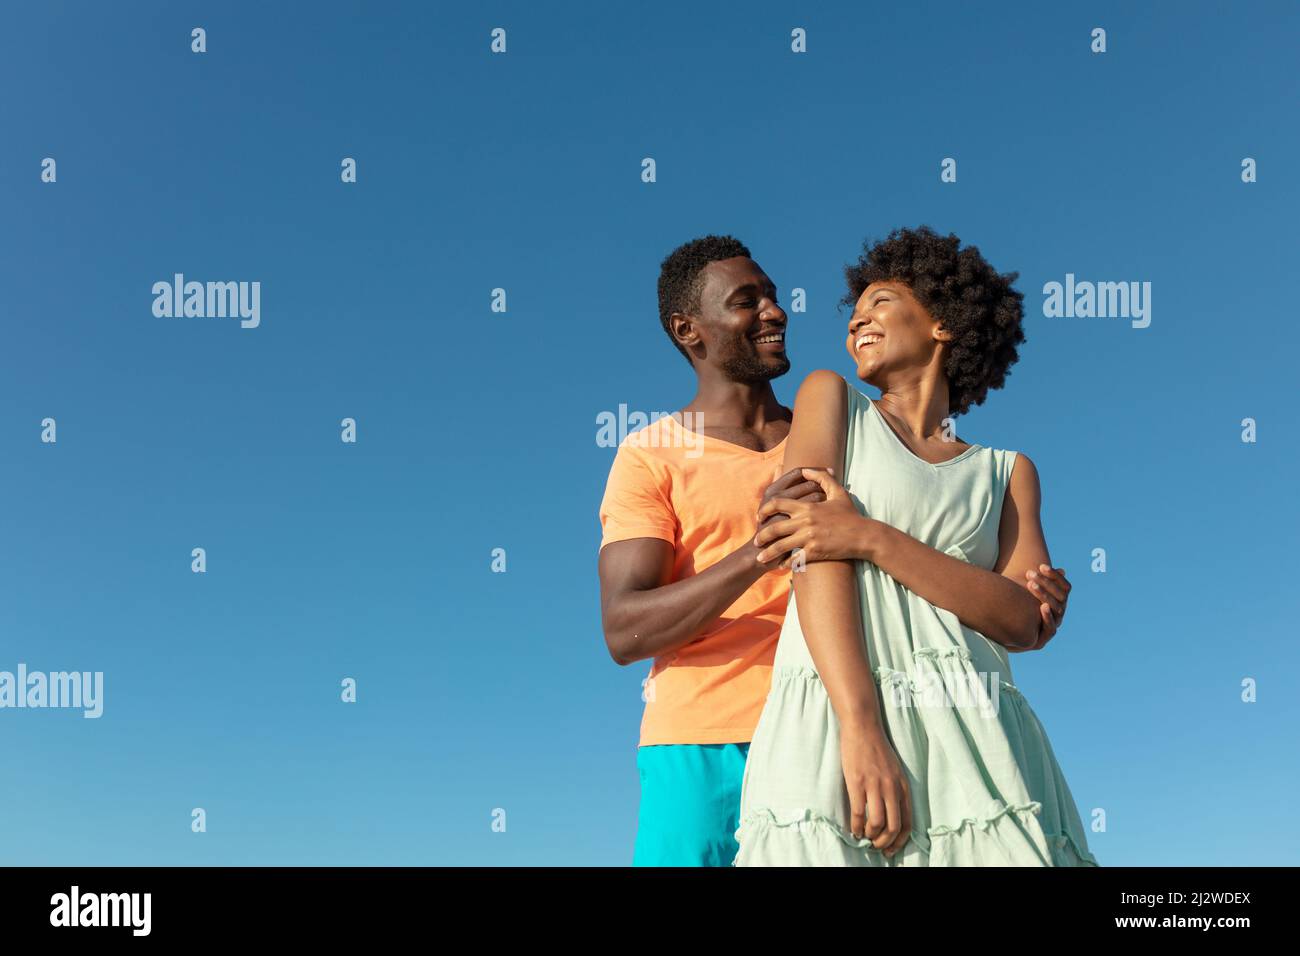 Low angle view of smiling african american couple against clear blue sky with copy space Stock Photo